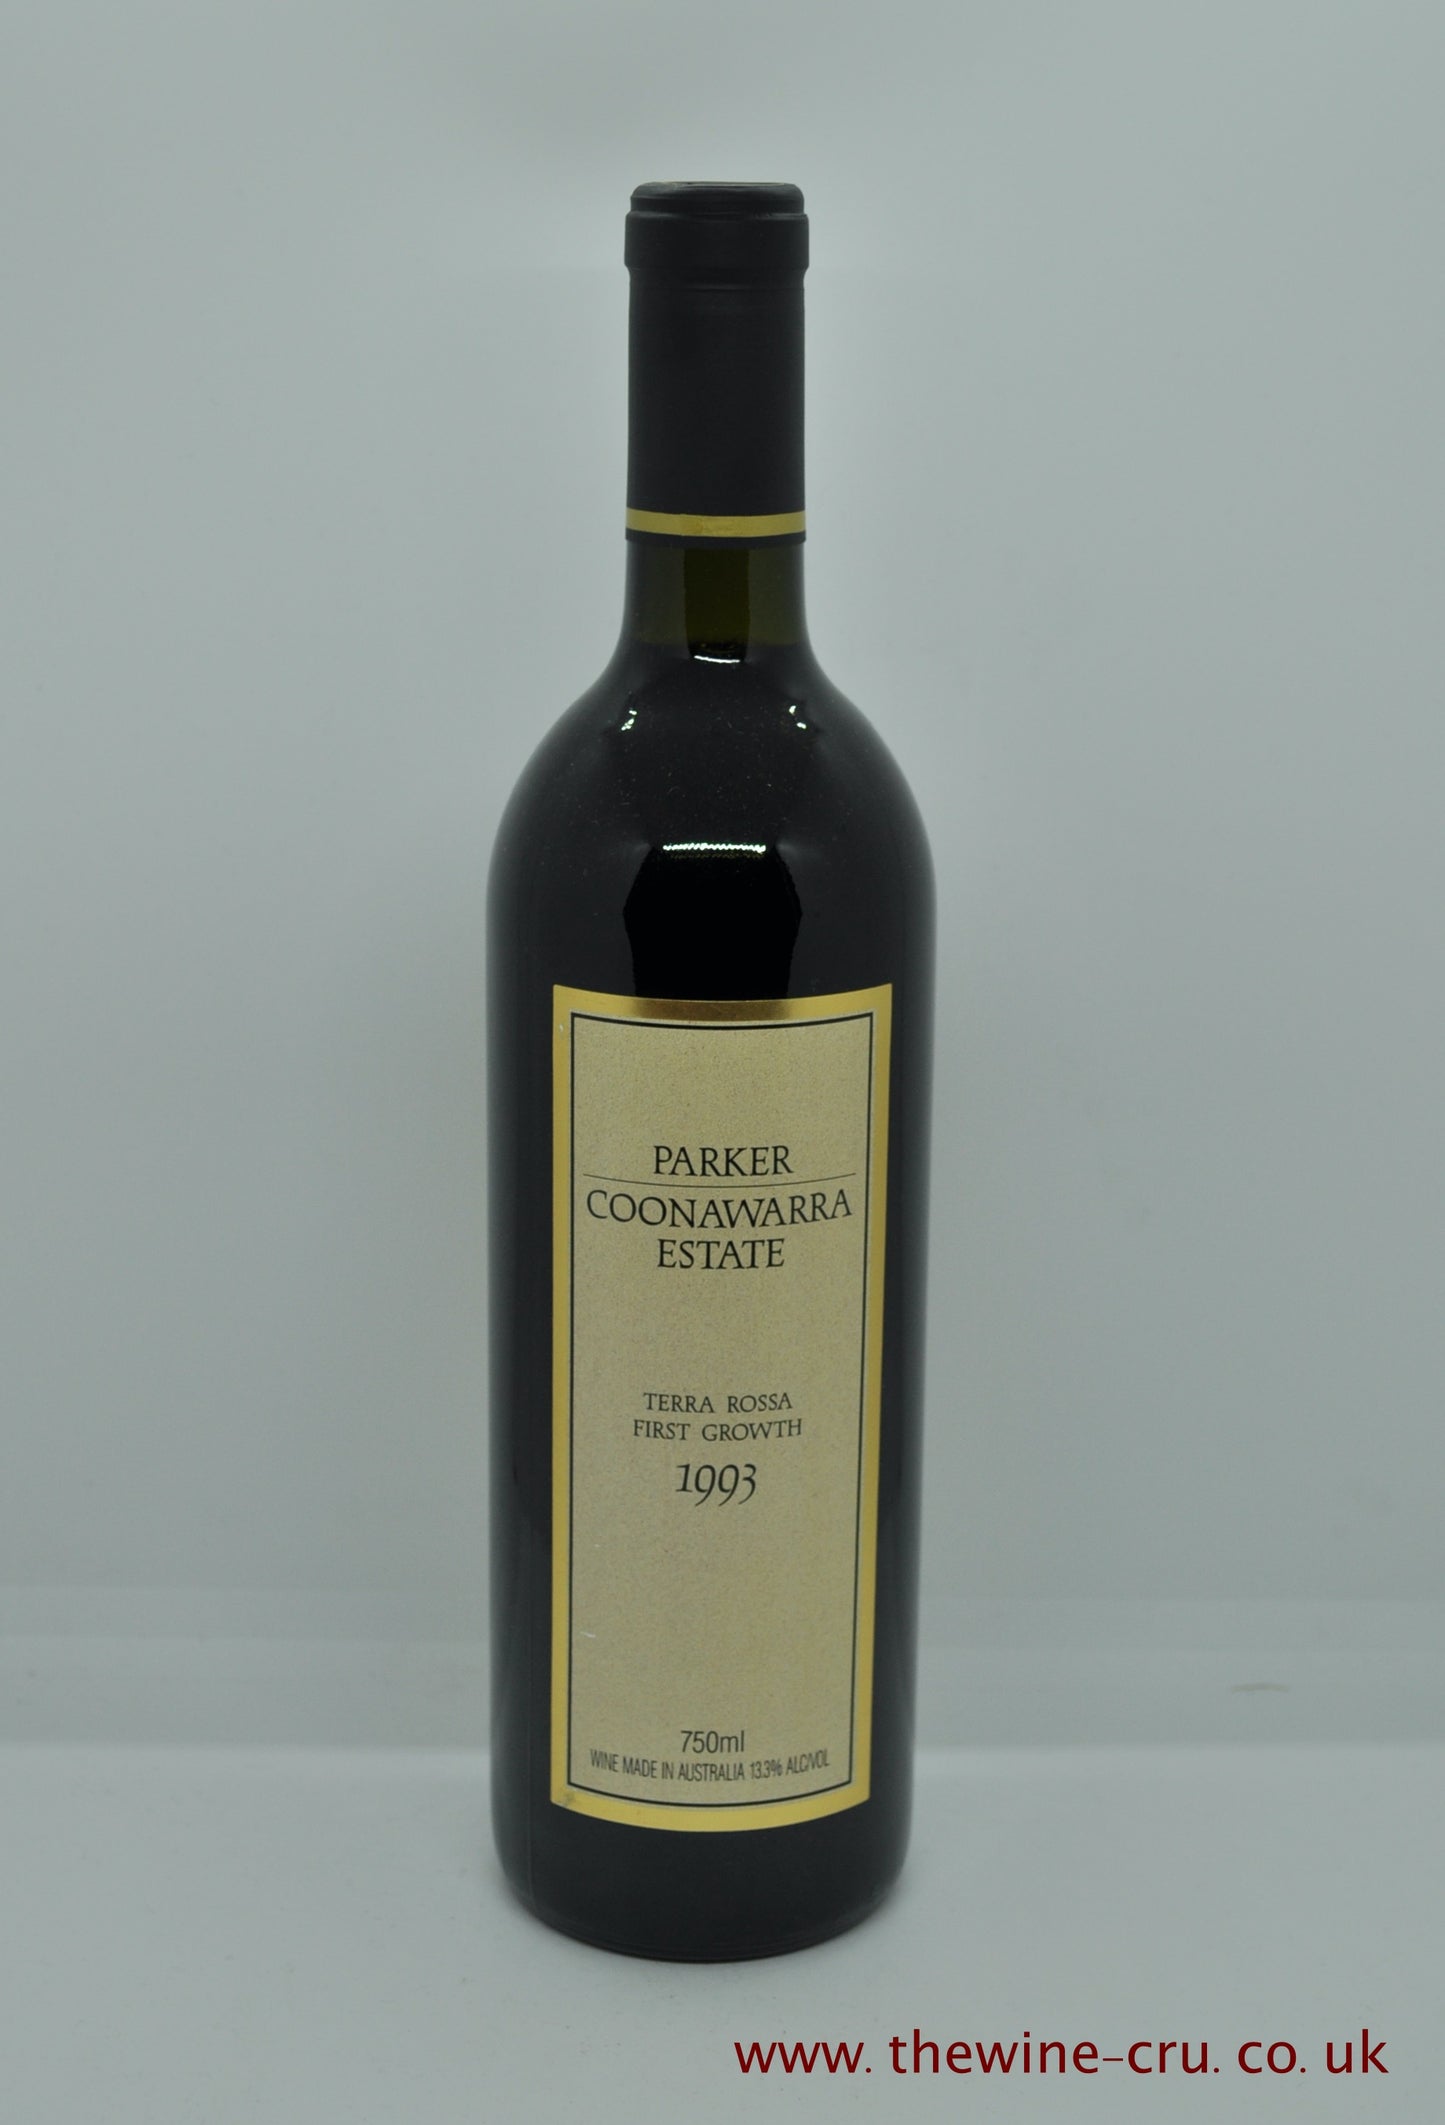 A bottle of 1993 vintage re wine from Parker Coonawarra Estate, First Growth, Australia. The bootle are in good condition with the level being base of neck. Immediate delivery. Free local delivery. Gift wrapping available.